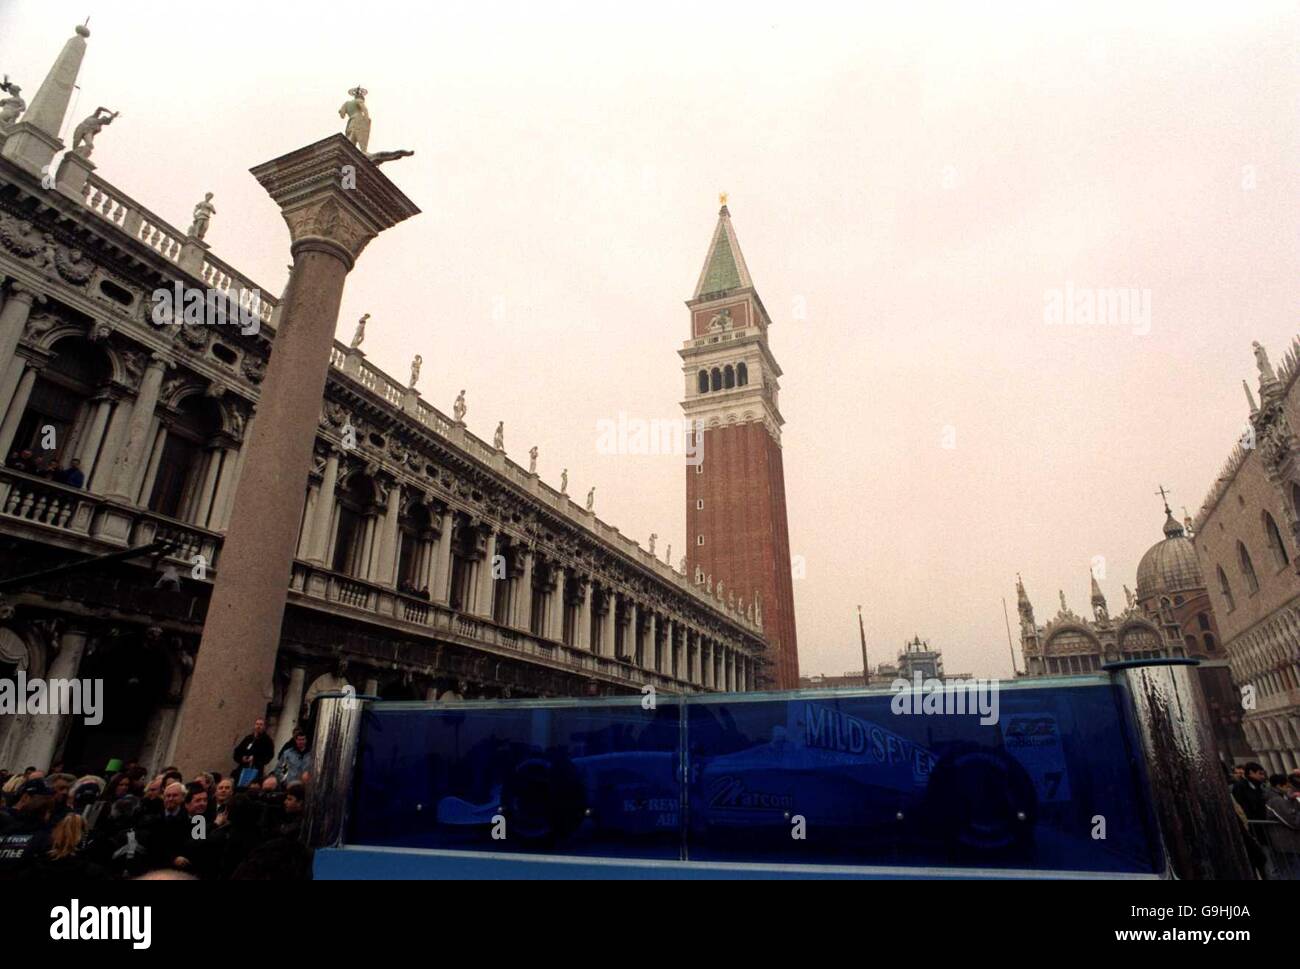 Benetton Venice High Resolution Stock Photography and Images - Alamy